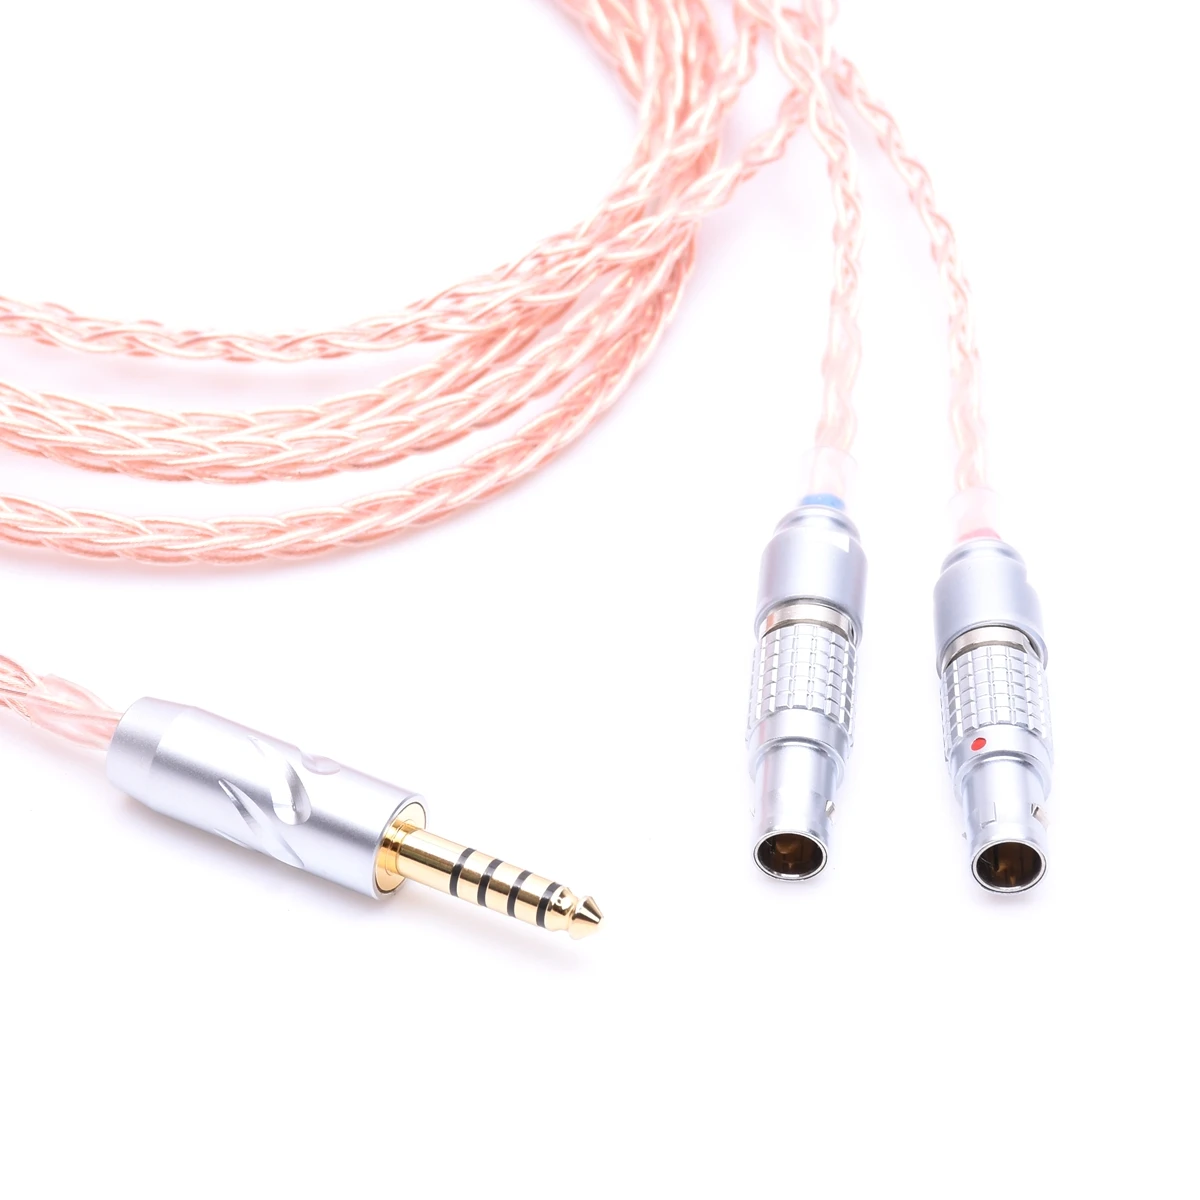 GAGACOCC 1Meter 4.4mm OCC copper Headphone Upgrade Cable for Focal Utopia Ultra enlarge